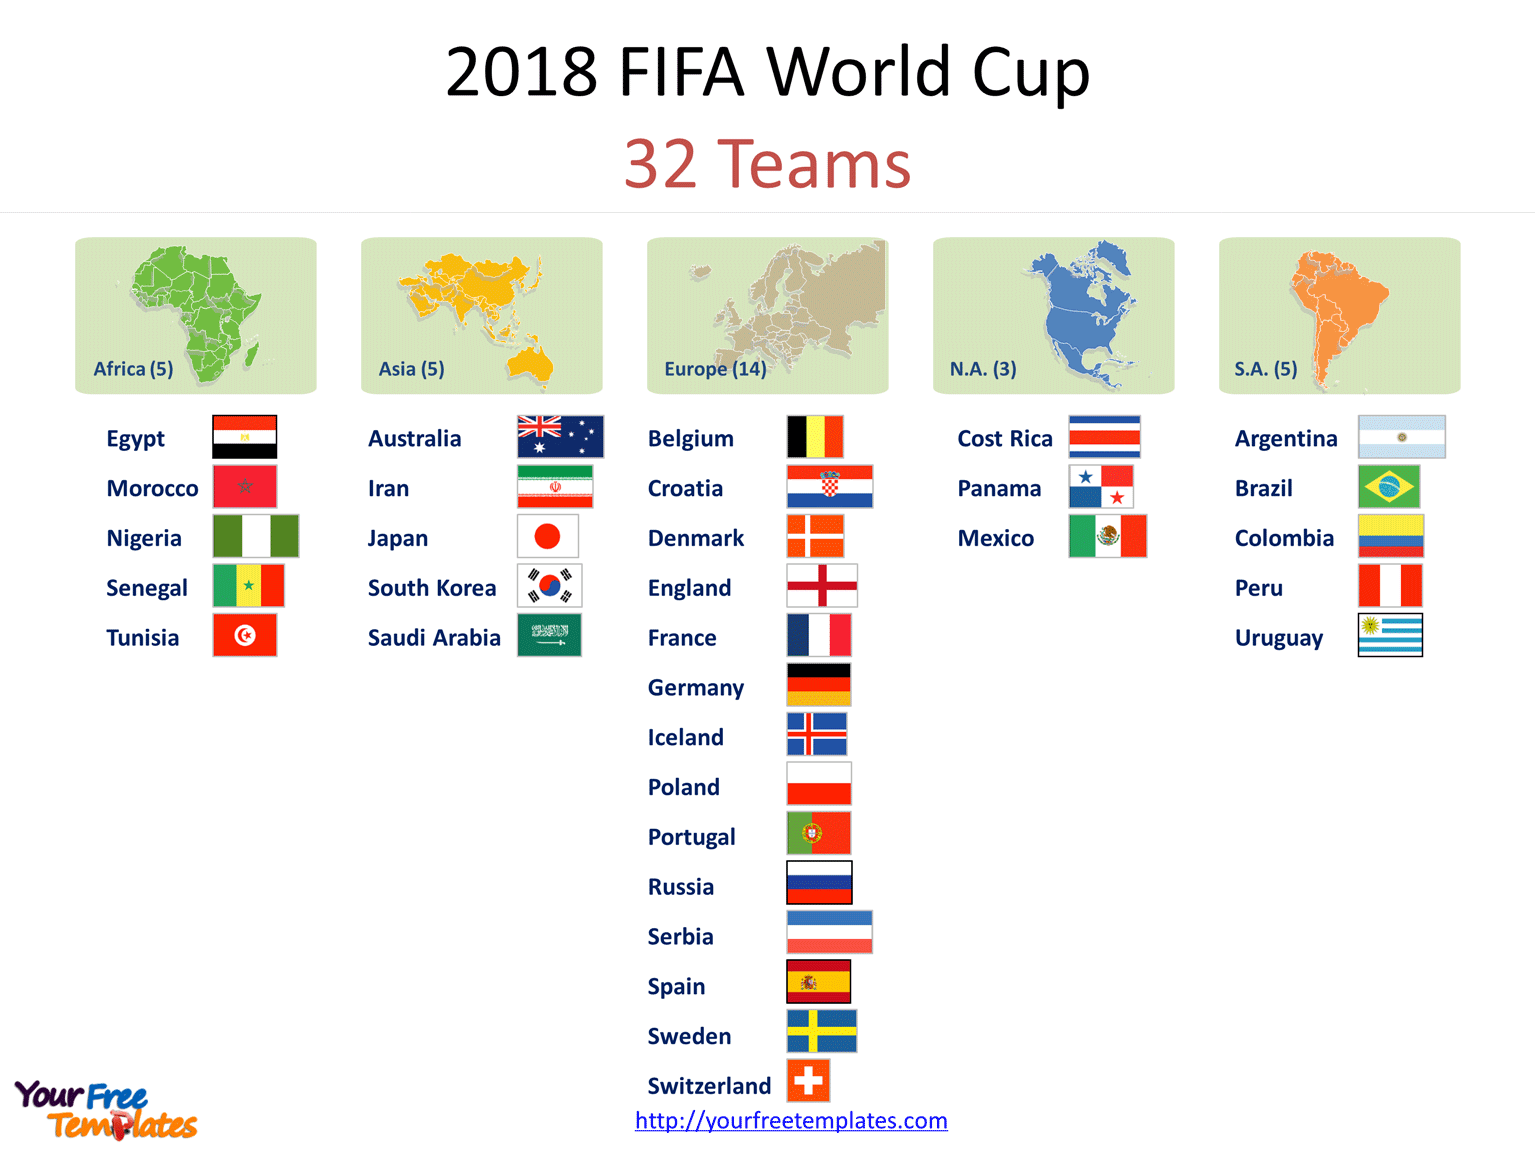 2018 FIFA World Cup with national flag icons for 32 teams on the 2018 FIFA World Cup PowerPoint templates